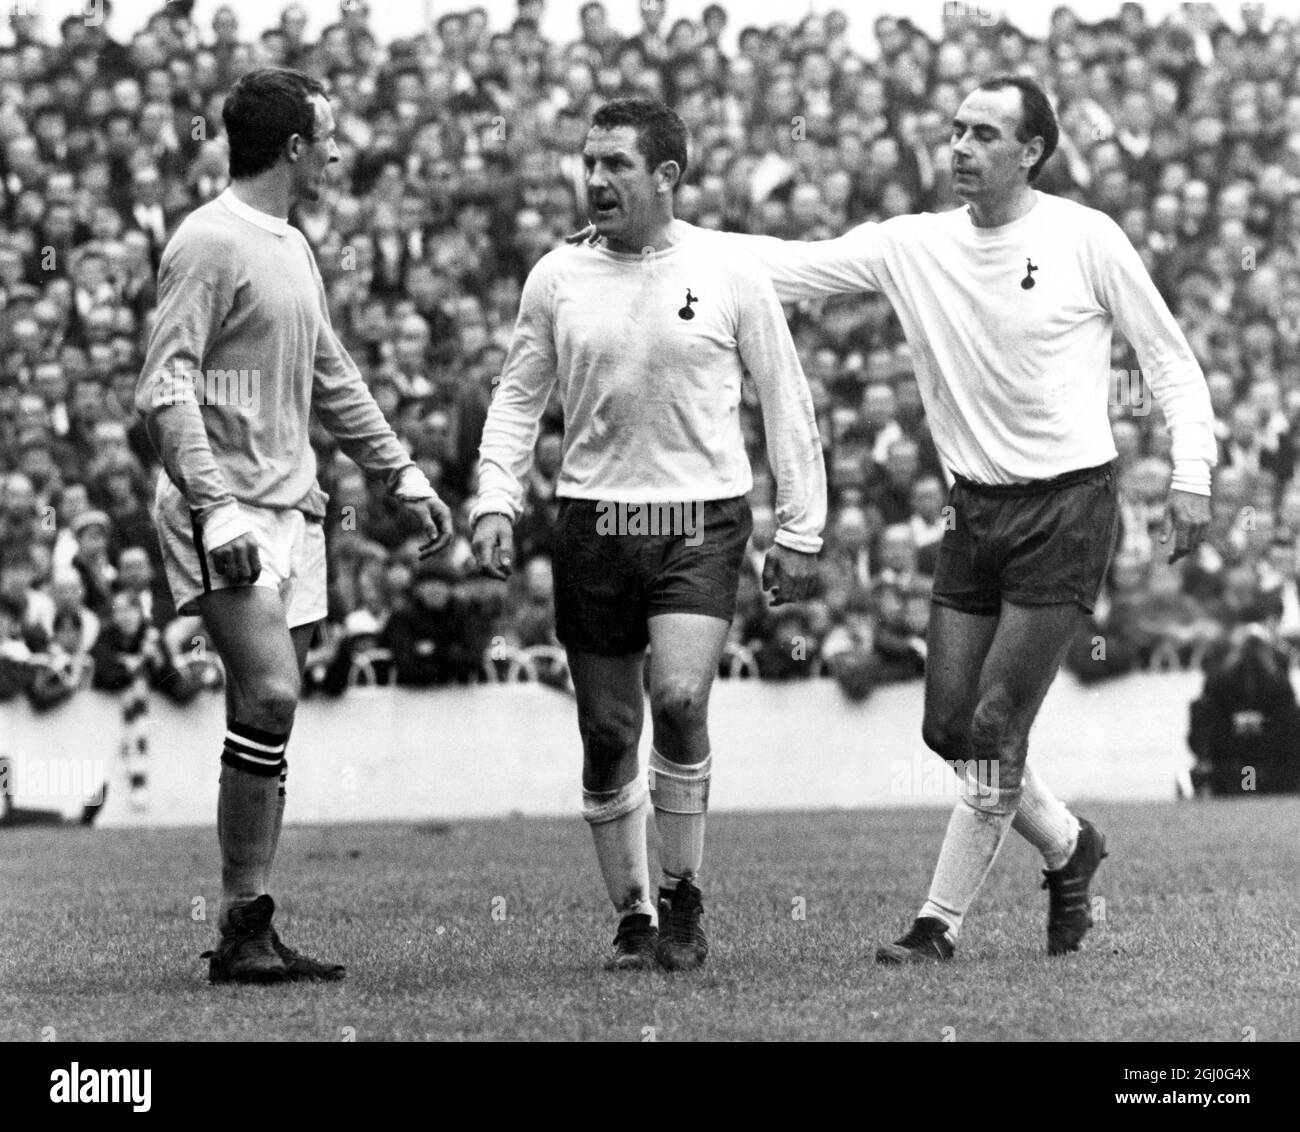 tottenham-hotspur-v-manchester-city-spurs-left-winger-alan-gilzean-appears-to-be-putting-a-restraining-hand-on-dave-mackays-shoulder-during-the-match-against-manchester-city-mike-summerbee-is-the-man-city-player-on-the-left-4th-may-1968-2GJ0G4X.jpg